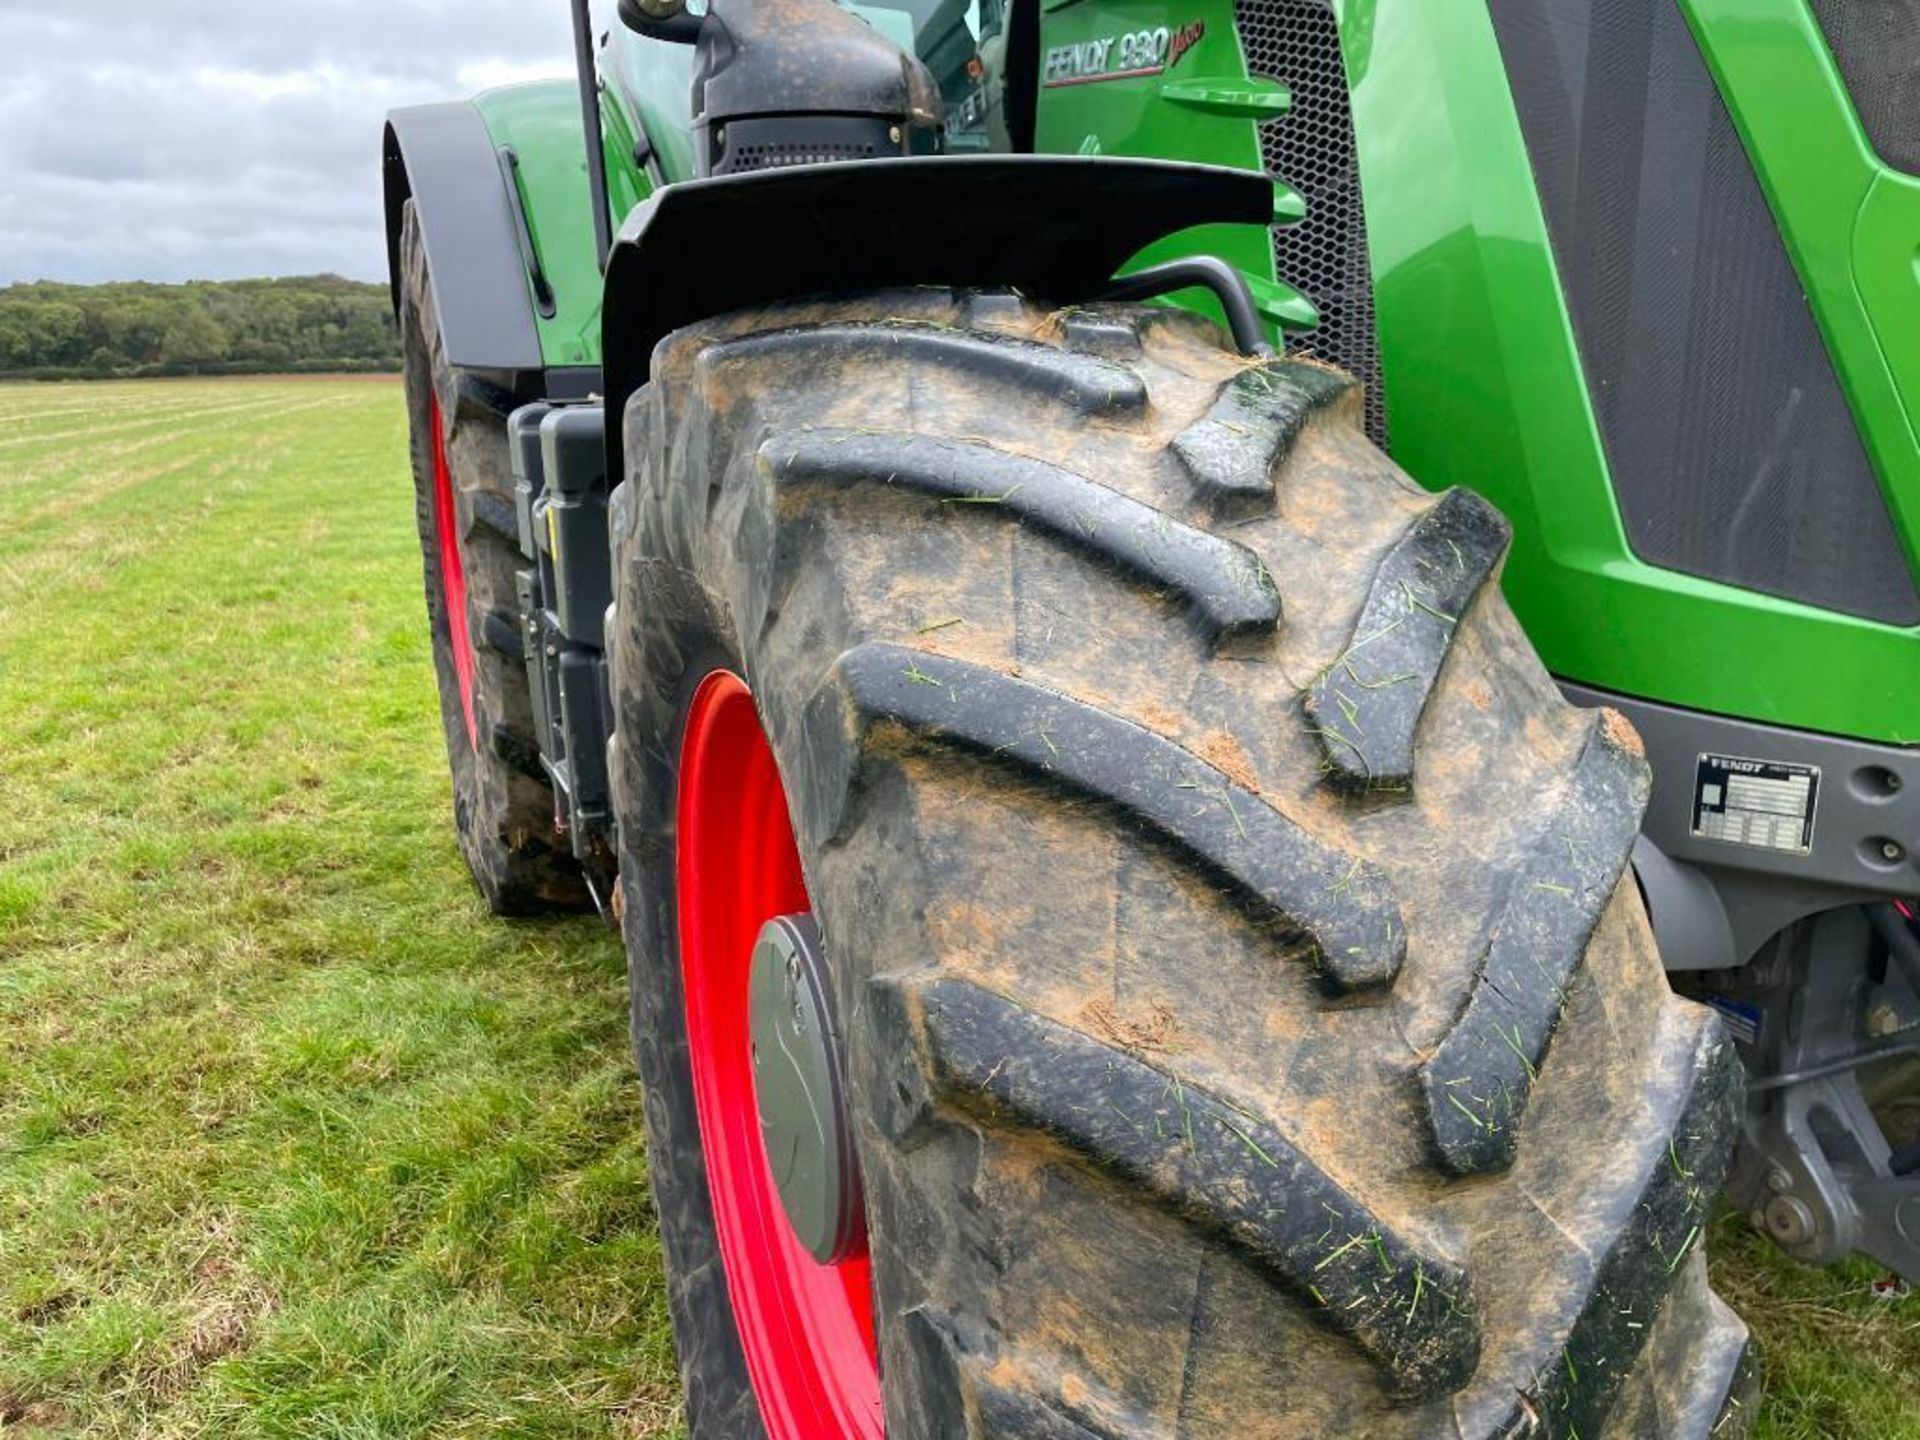 2018 Fendt 930 Vario Profi Plus 65kph 4wd tractor with front and cab suspension, front linkage and h - Image 5 of 20